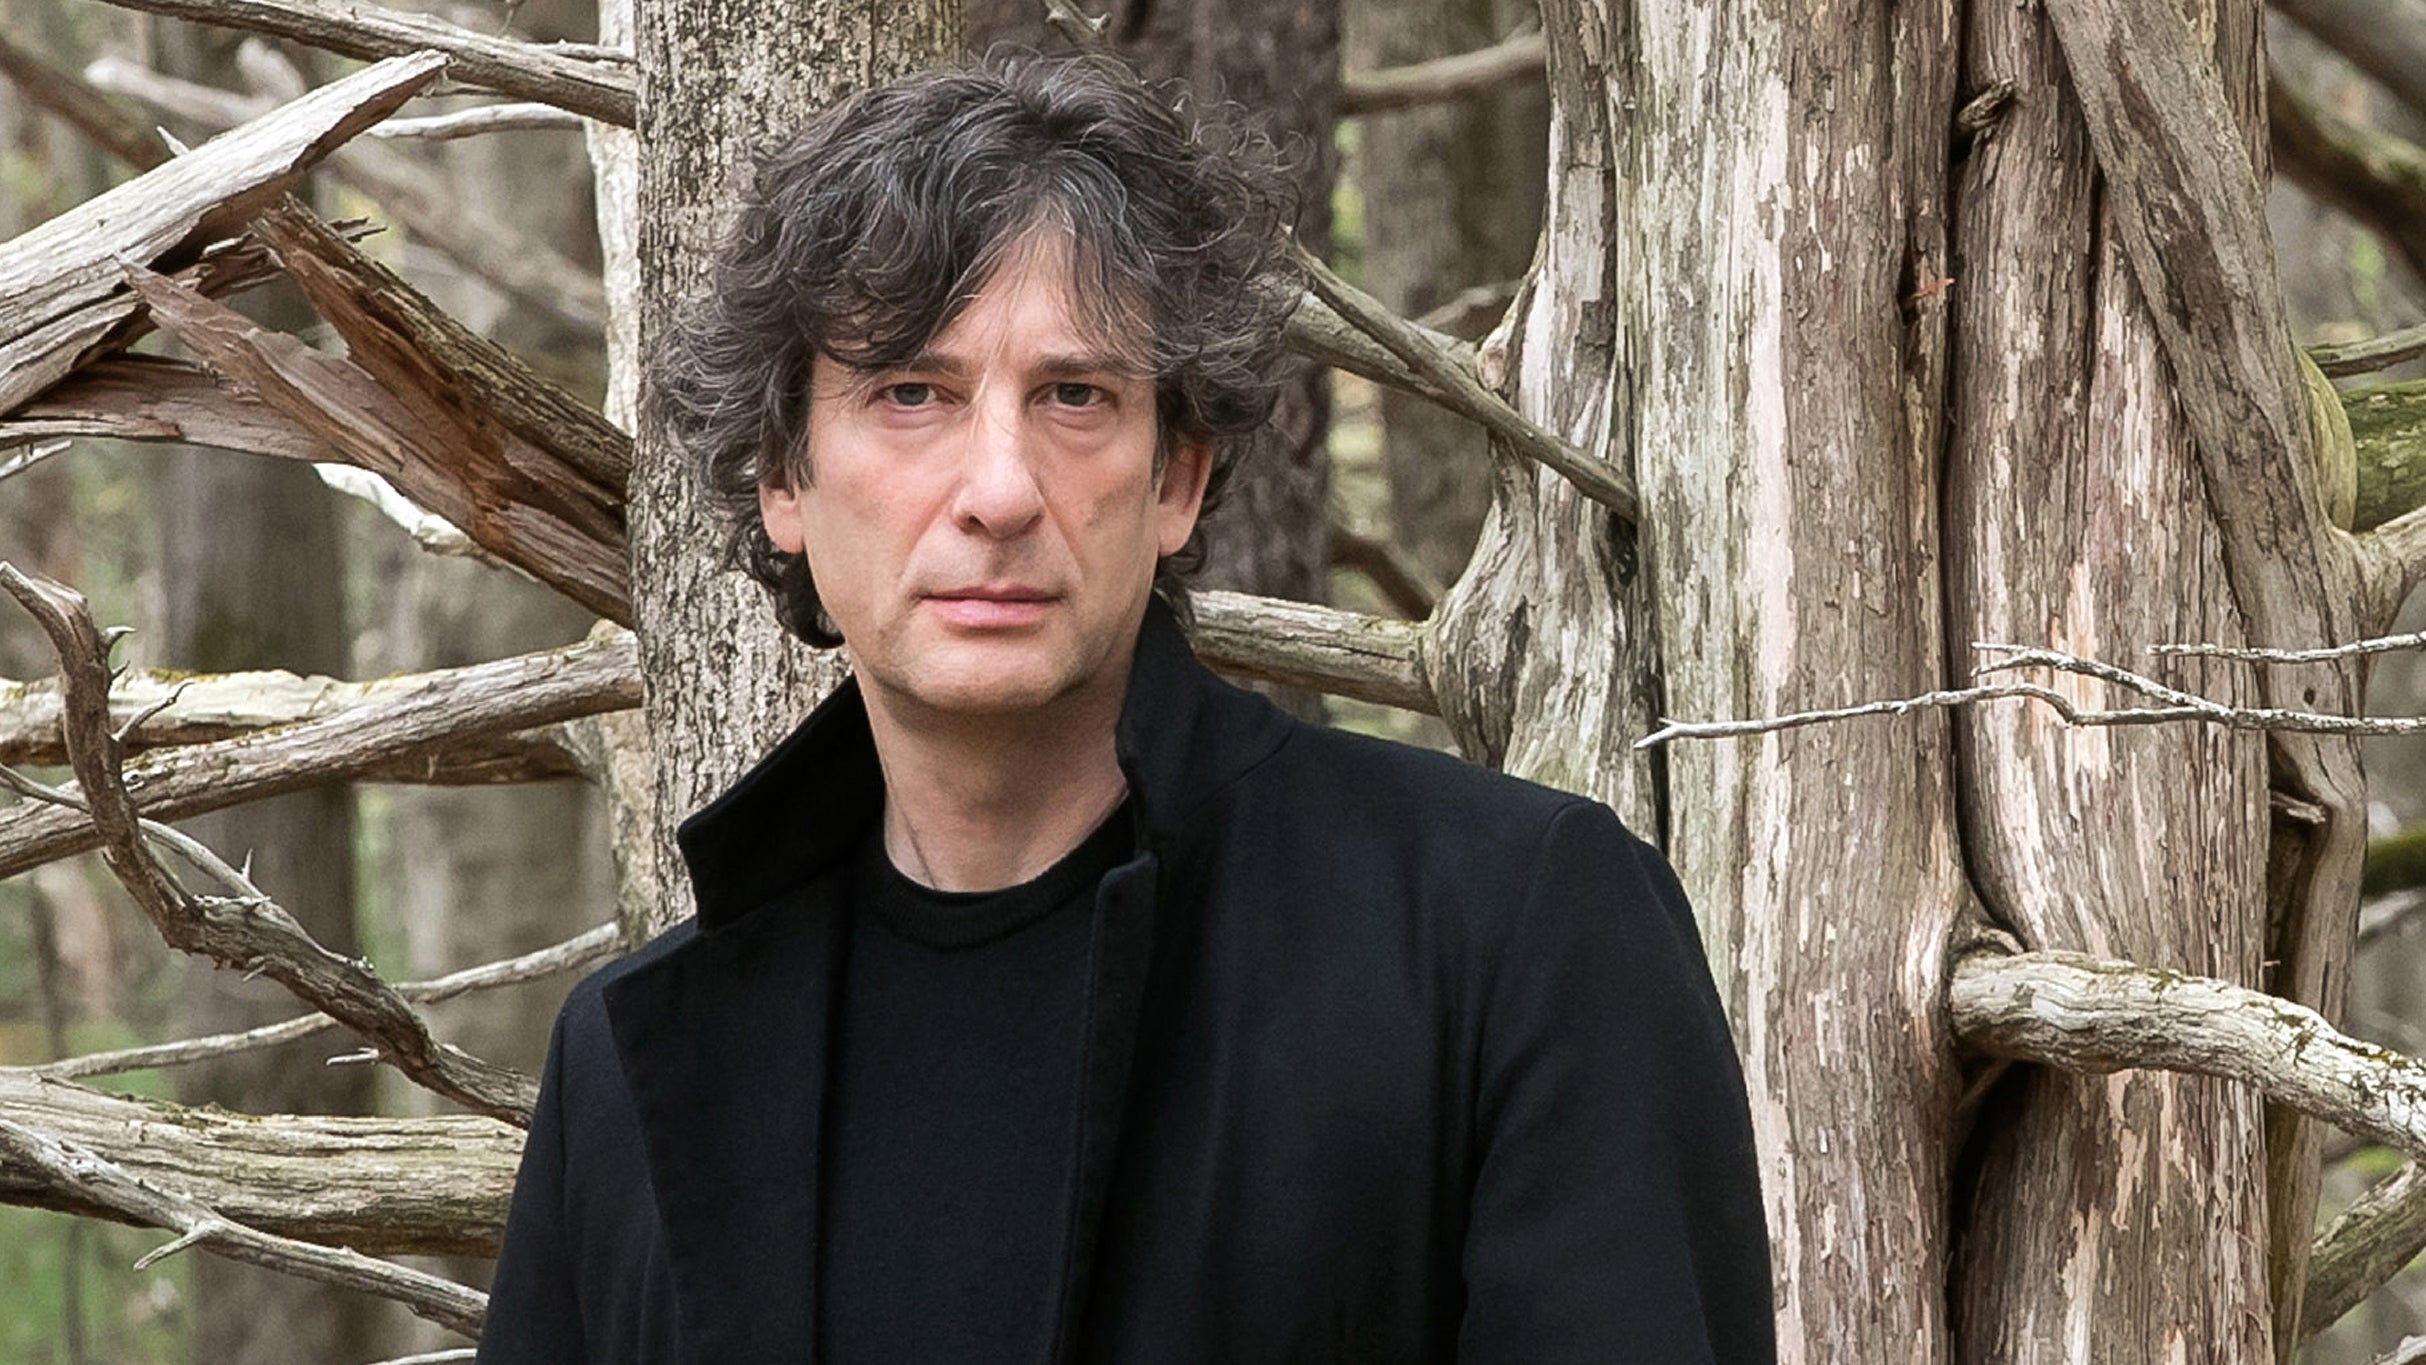 Neil Gaiman's Heaven Celebrating 25 Years Of The Art Of Elysium in Los Angeles promo photo for Ticketmaster presale offer code